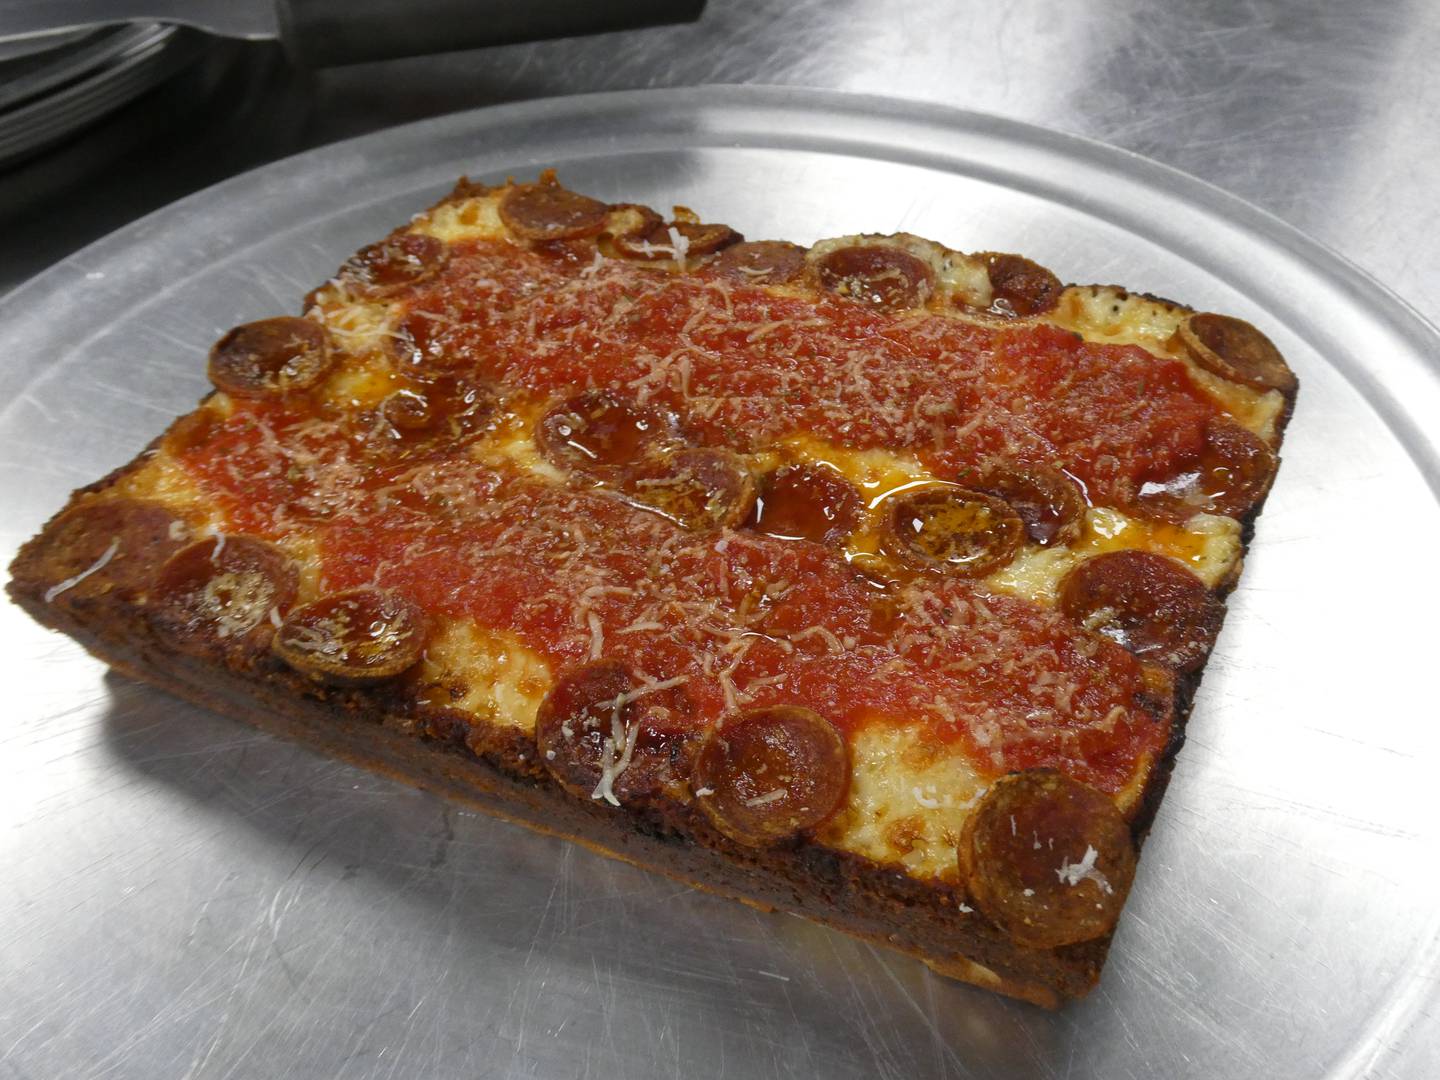 An example of the Detroit-style pepperoni pizza served at Pizza Pushers, a new restaurant in Algonquin specializing in the Motor City favorite.